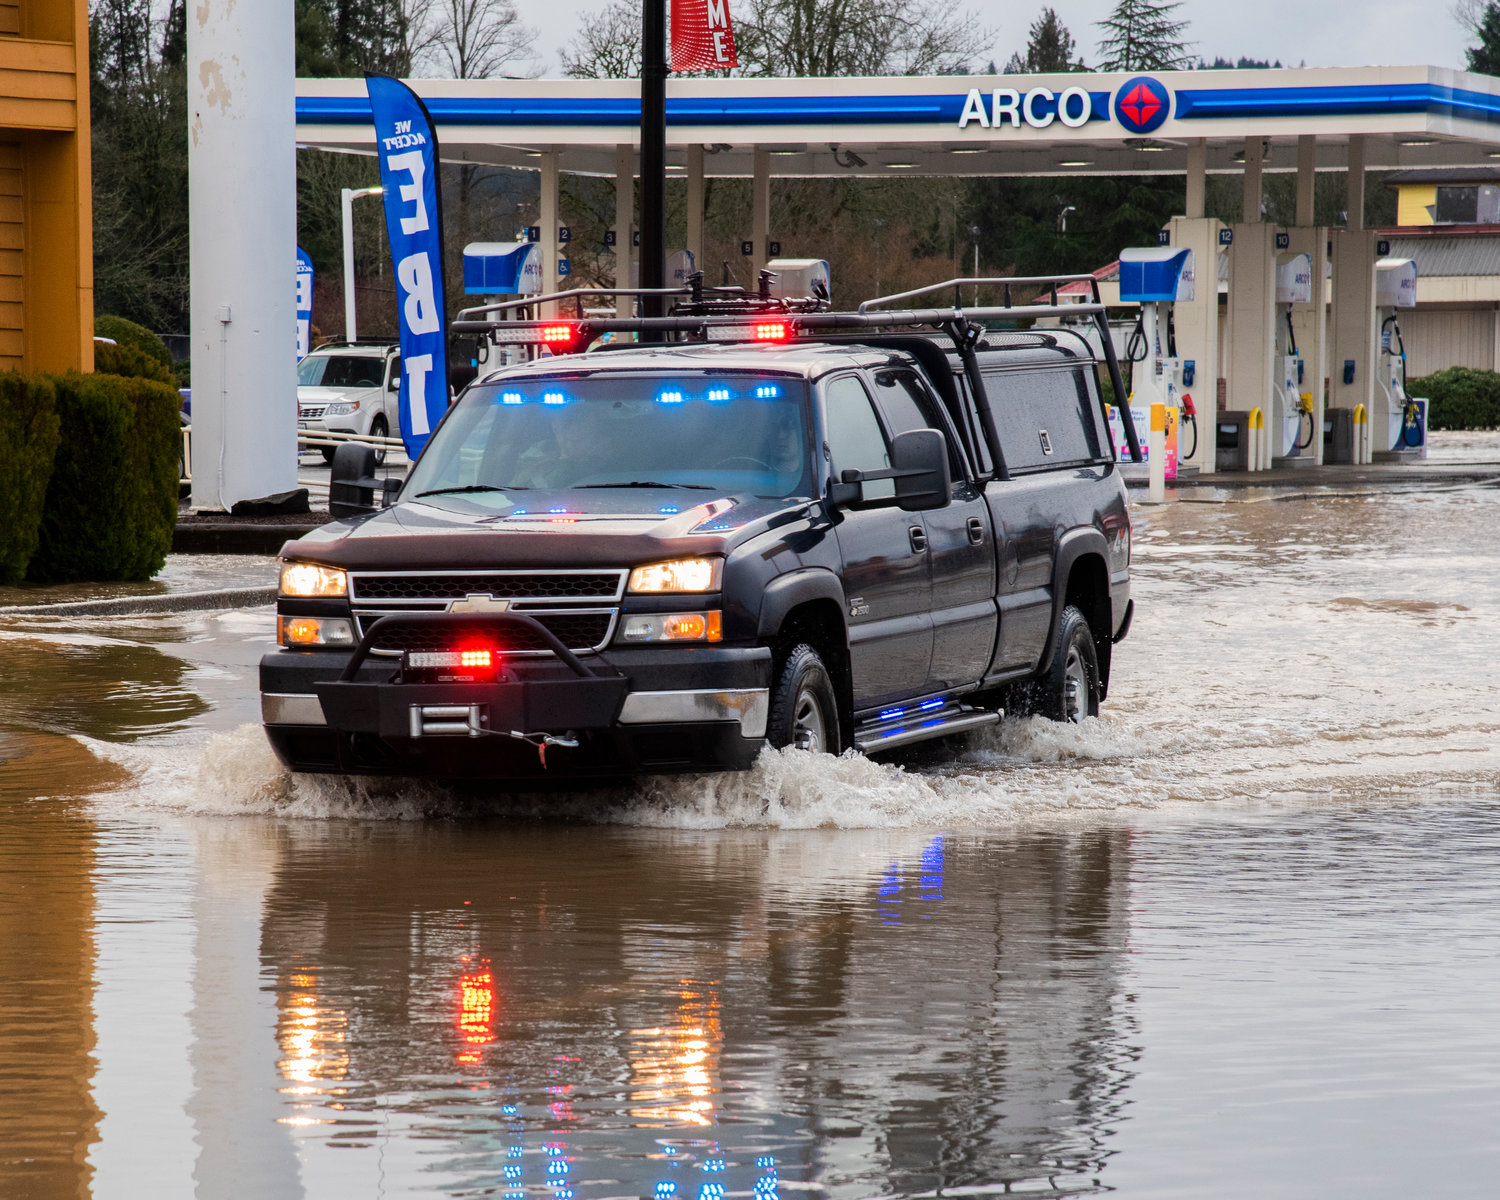 Law enforcement vehicles drive through floodwaters along Harrison Avenue in Centralia on Friday.